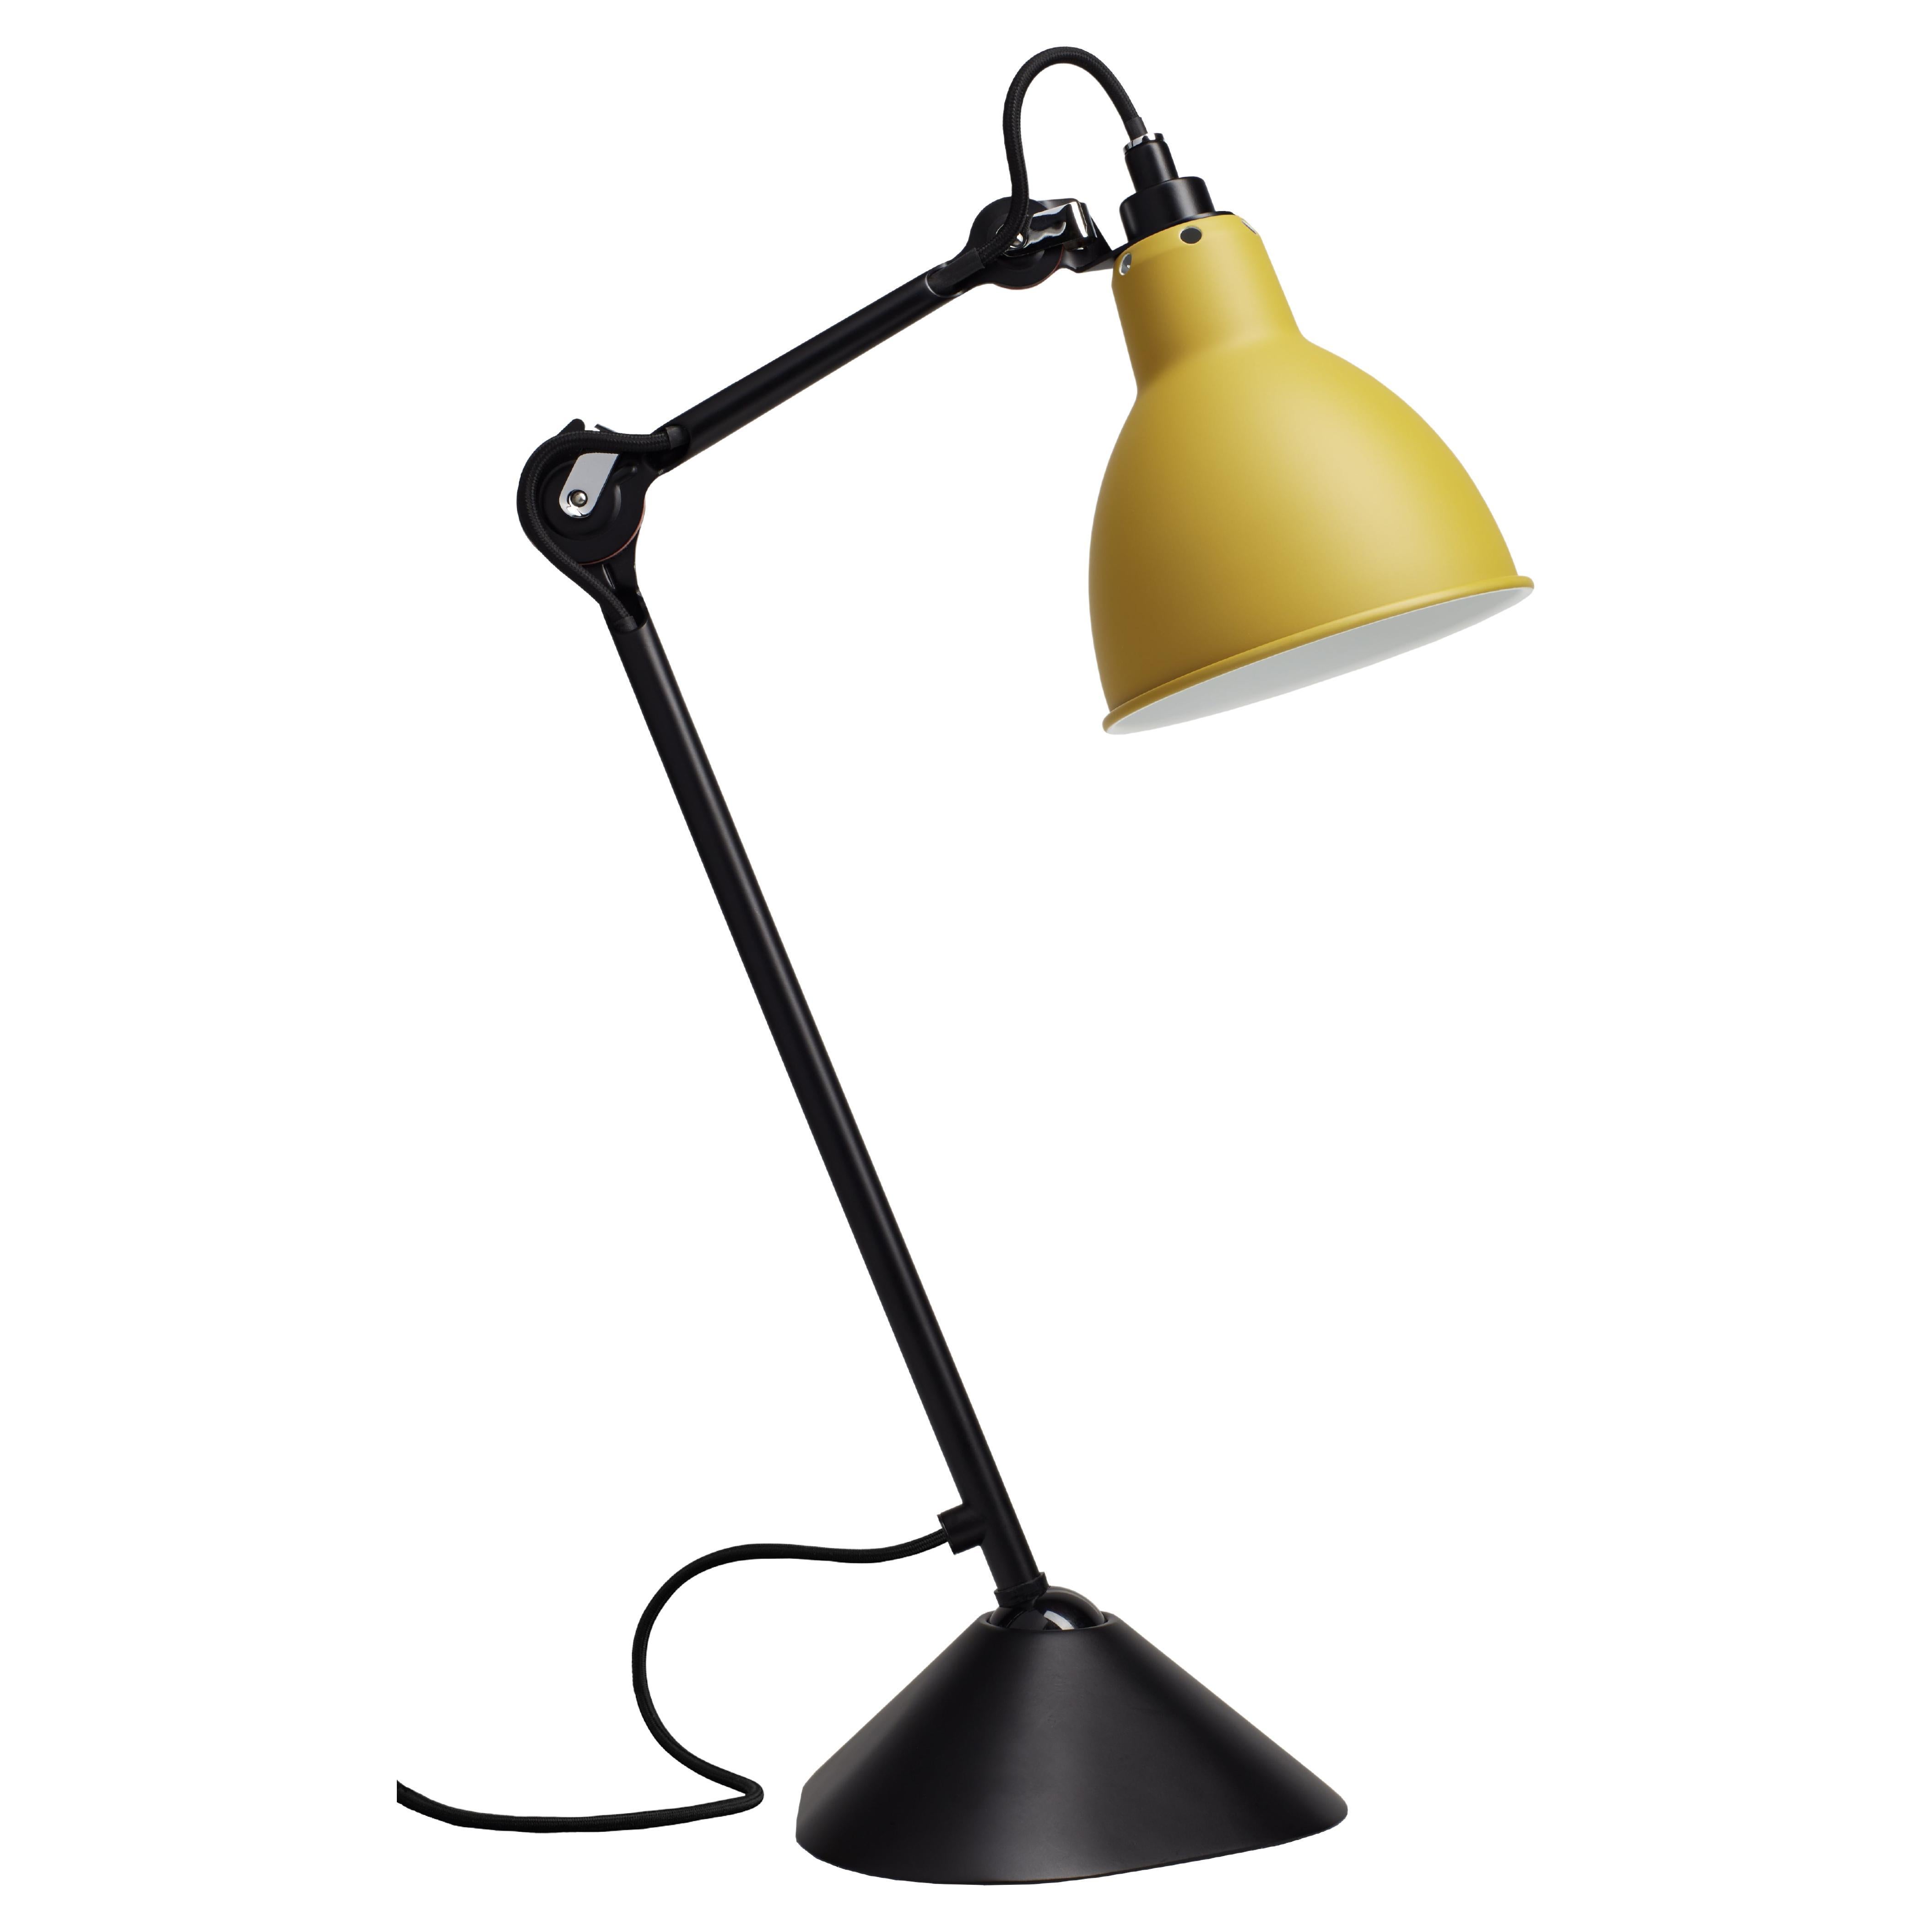 DCW Editions La Lampe Gras N°205 Table Lamp in Black Arm with Yellow Shade For Sale